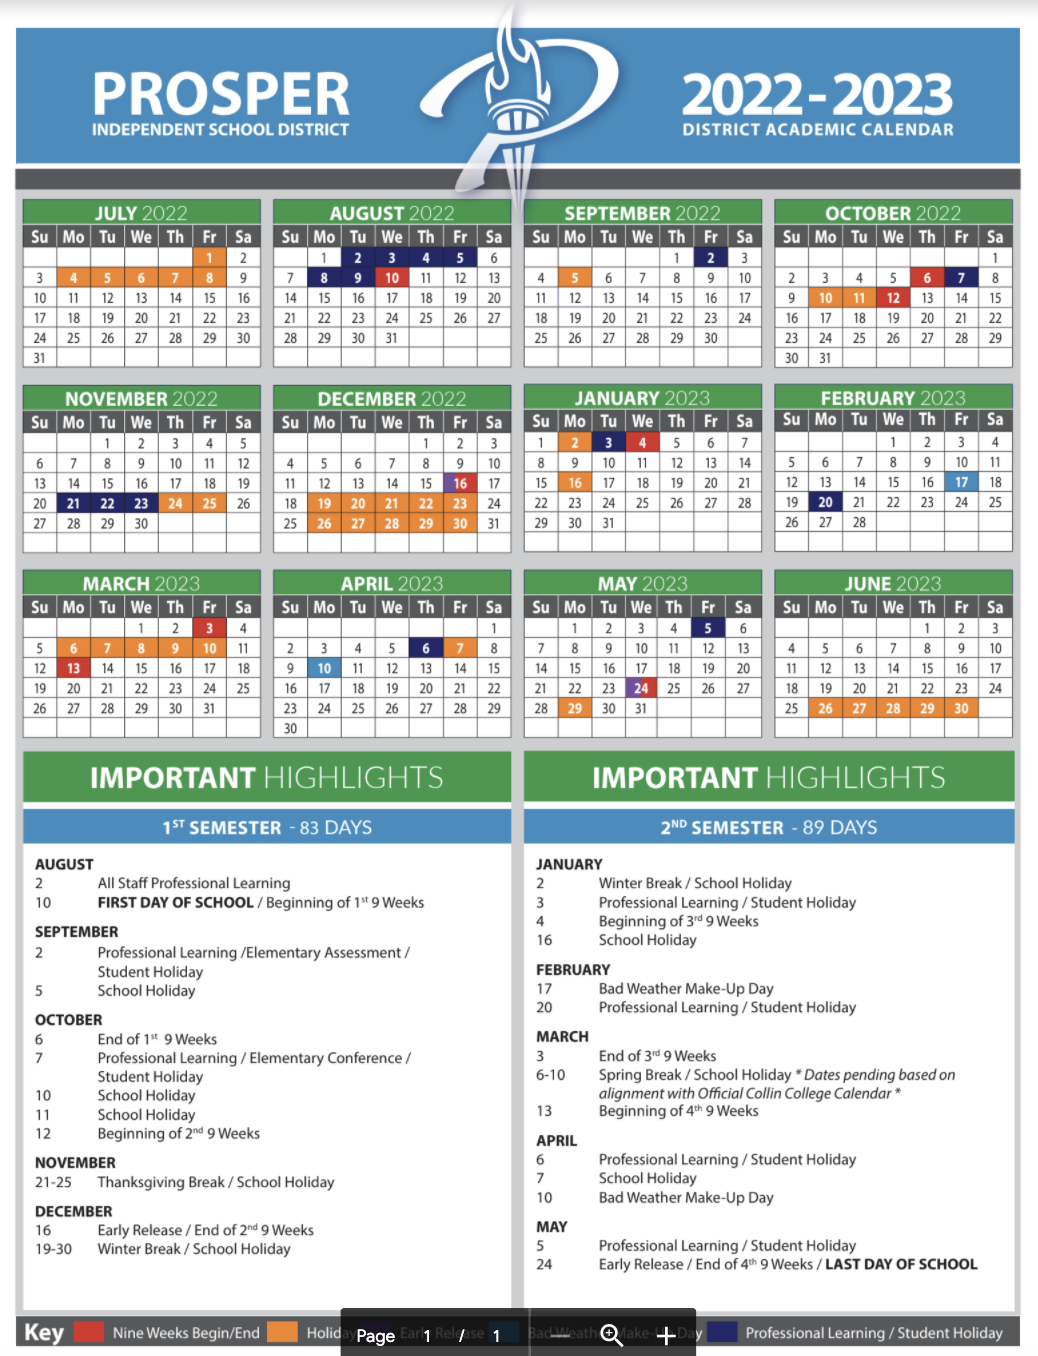 Pisd 2022 2023 Calendar Here Are Prosper Isd's School Calendars For The 2022-2023 And The 2023-2024  School Years | Cities | Checkoutdfw.com